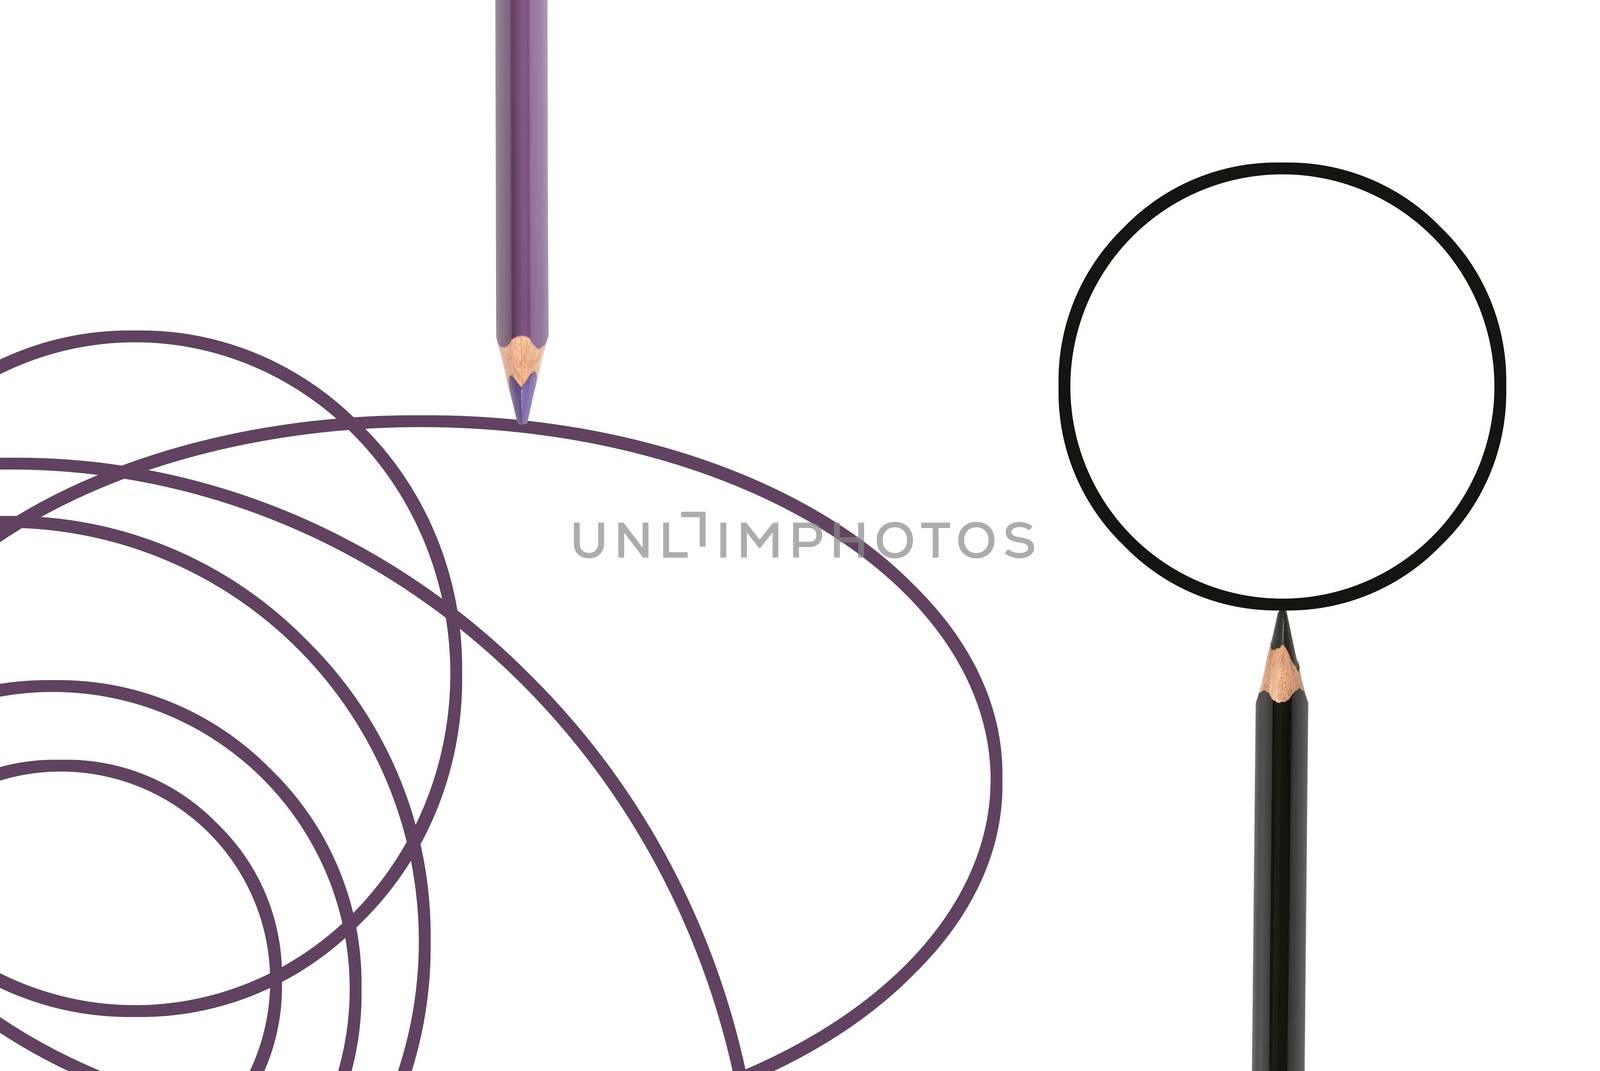 Abstract composition with black and purple lines and pencils